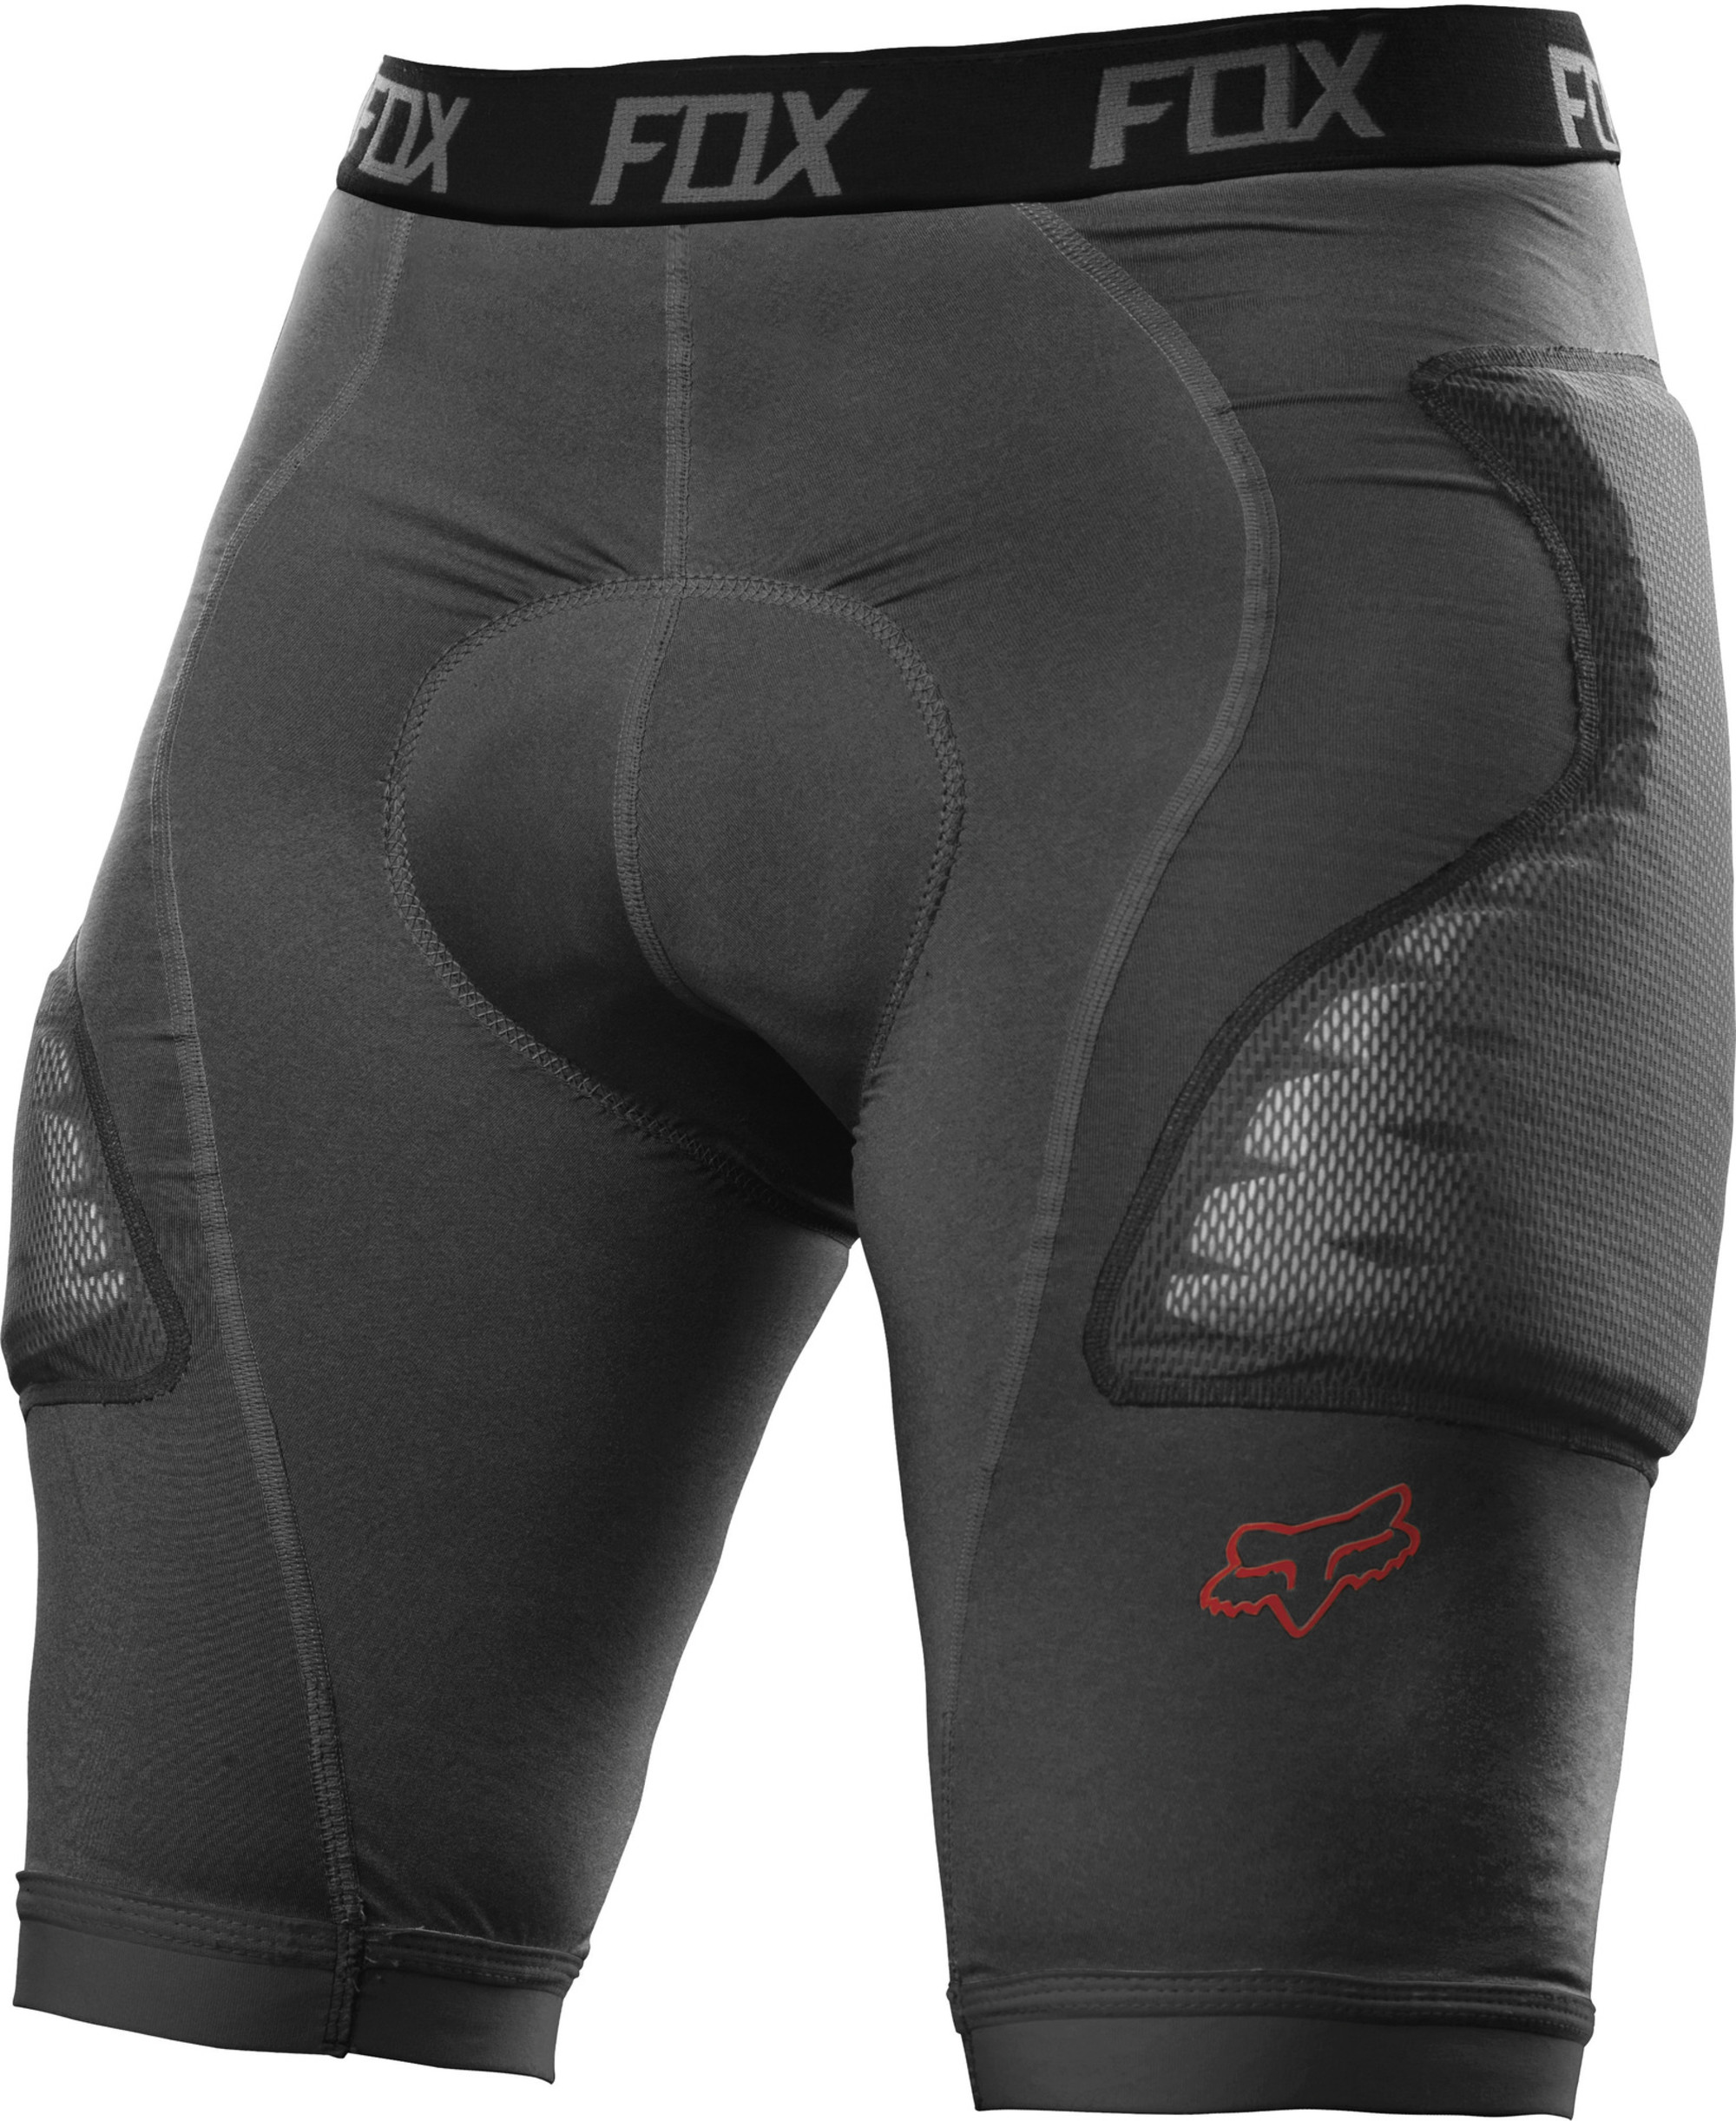 fox racing under protection protections for men titan race short